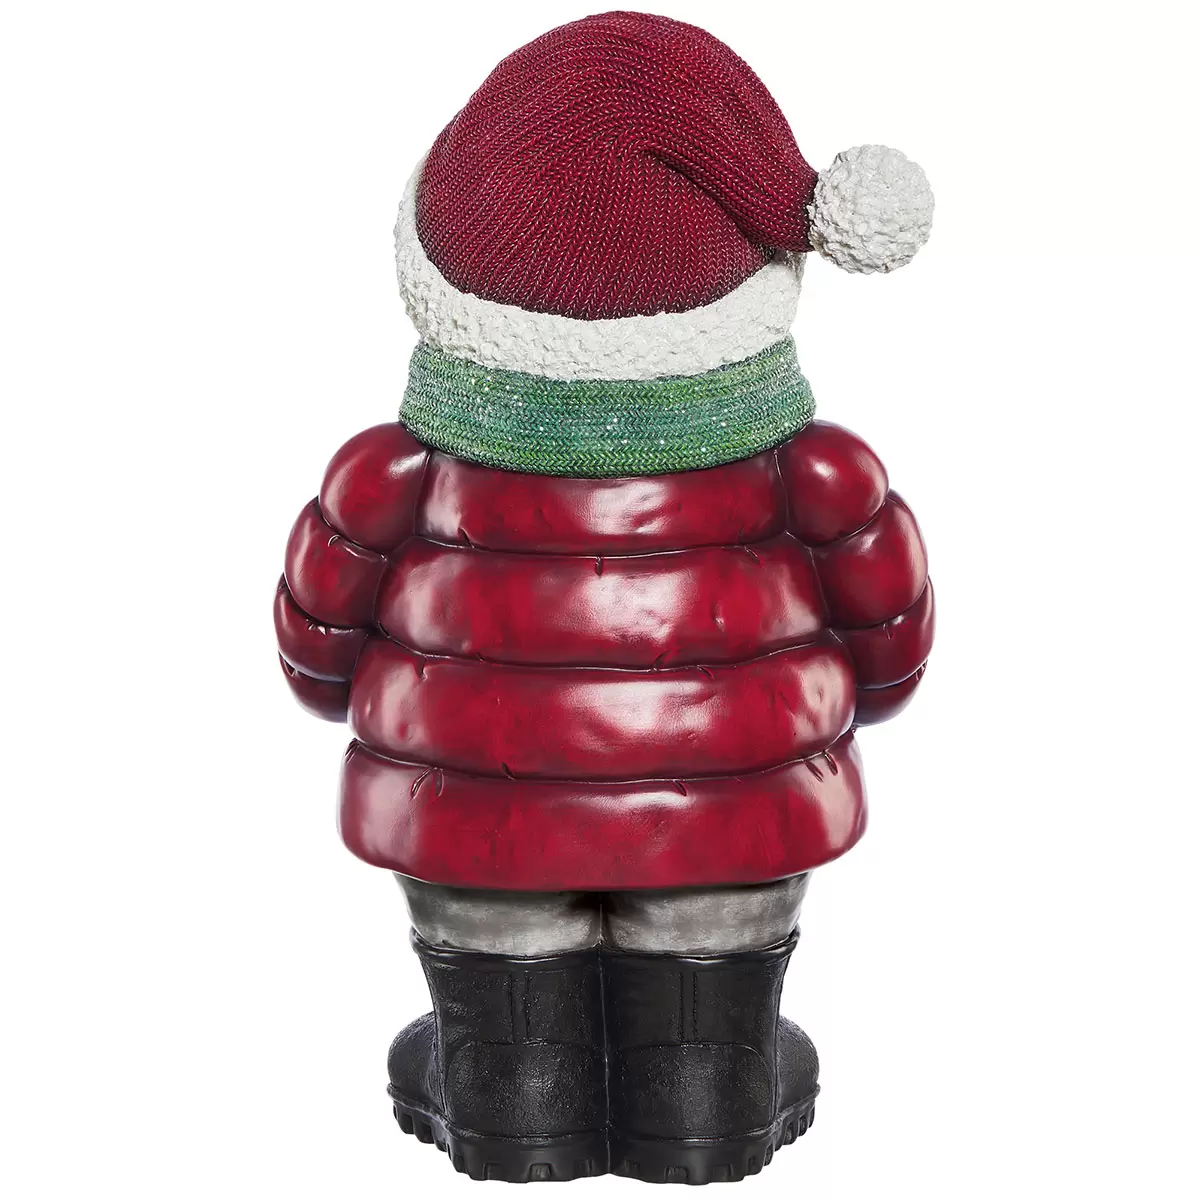 Buy Snowman Greeter with Glass LED Ball Back Image at Costco.co.uk